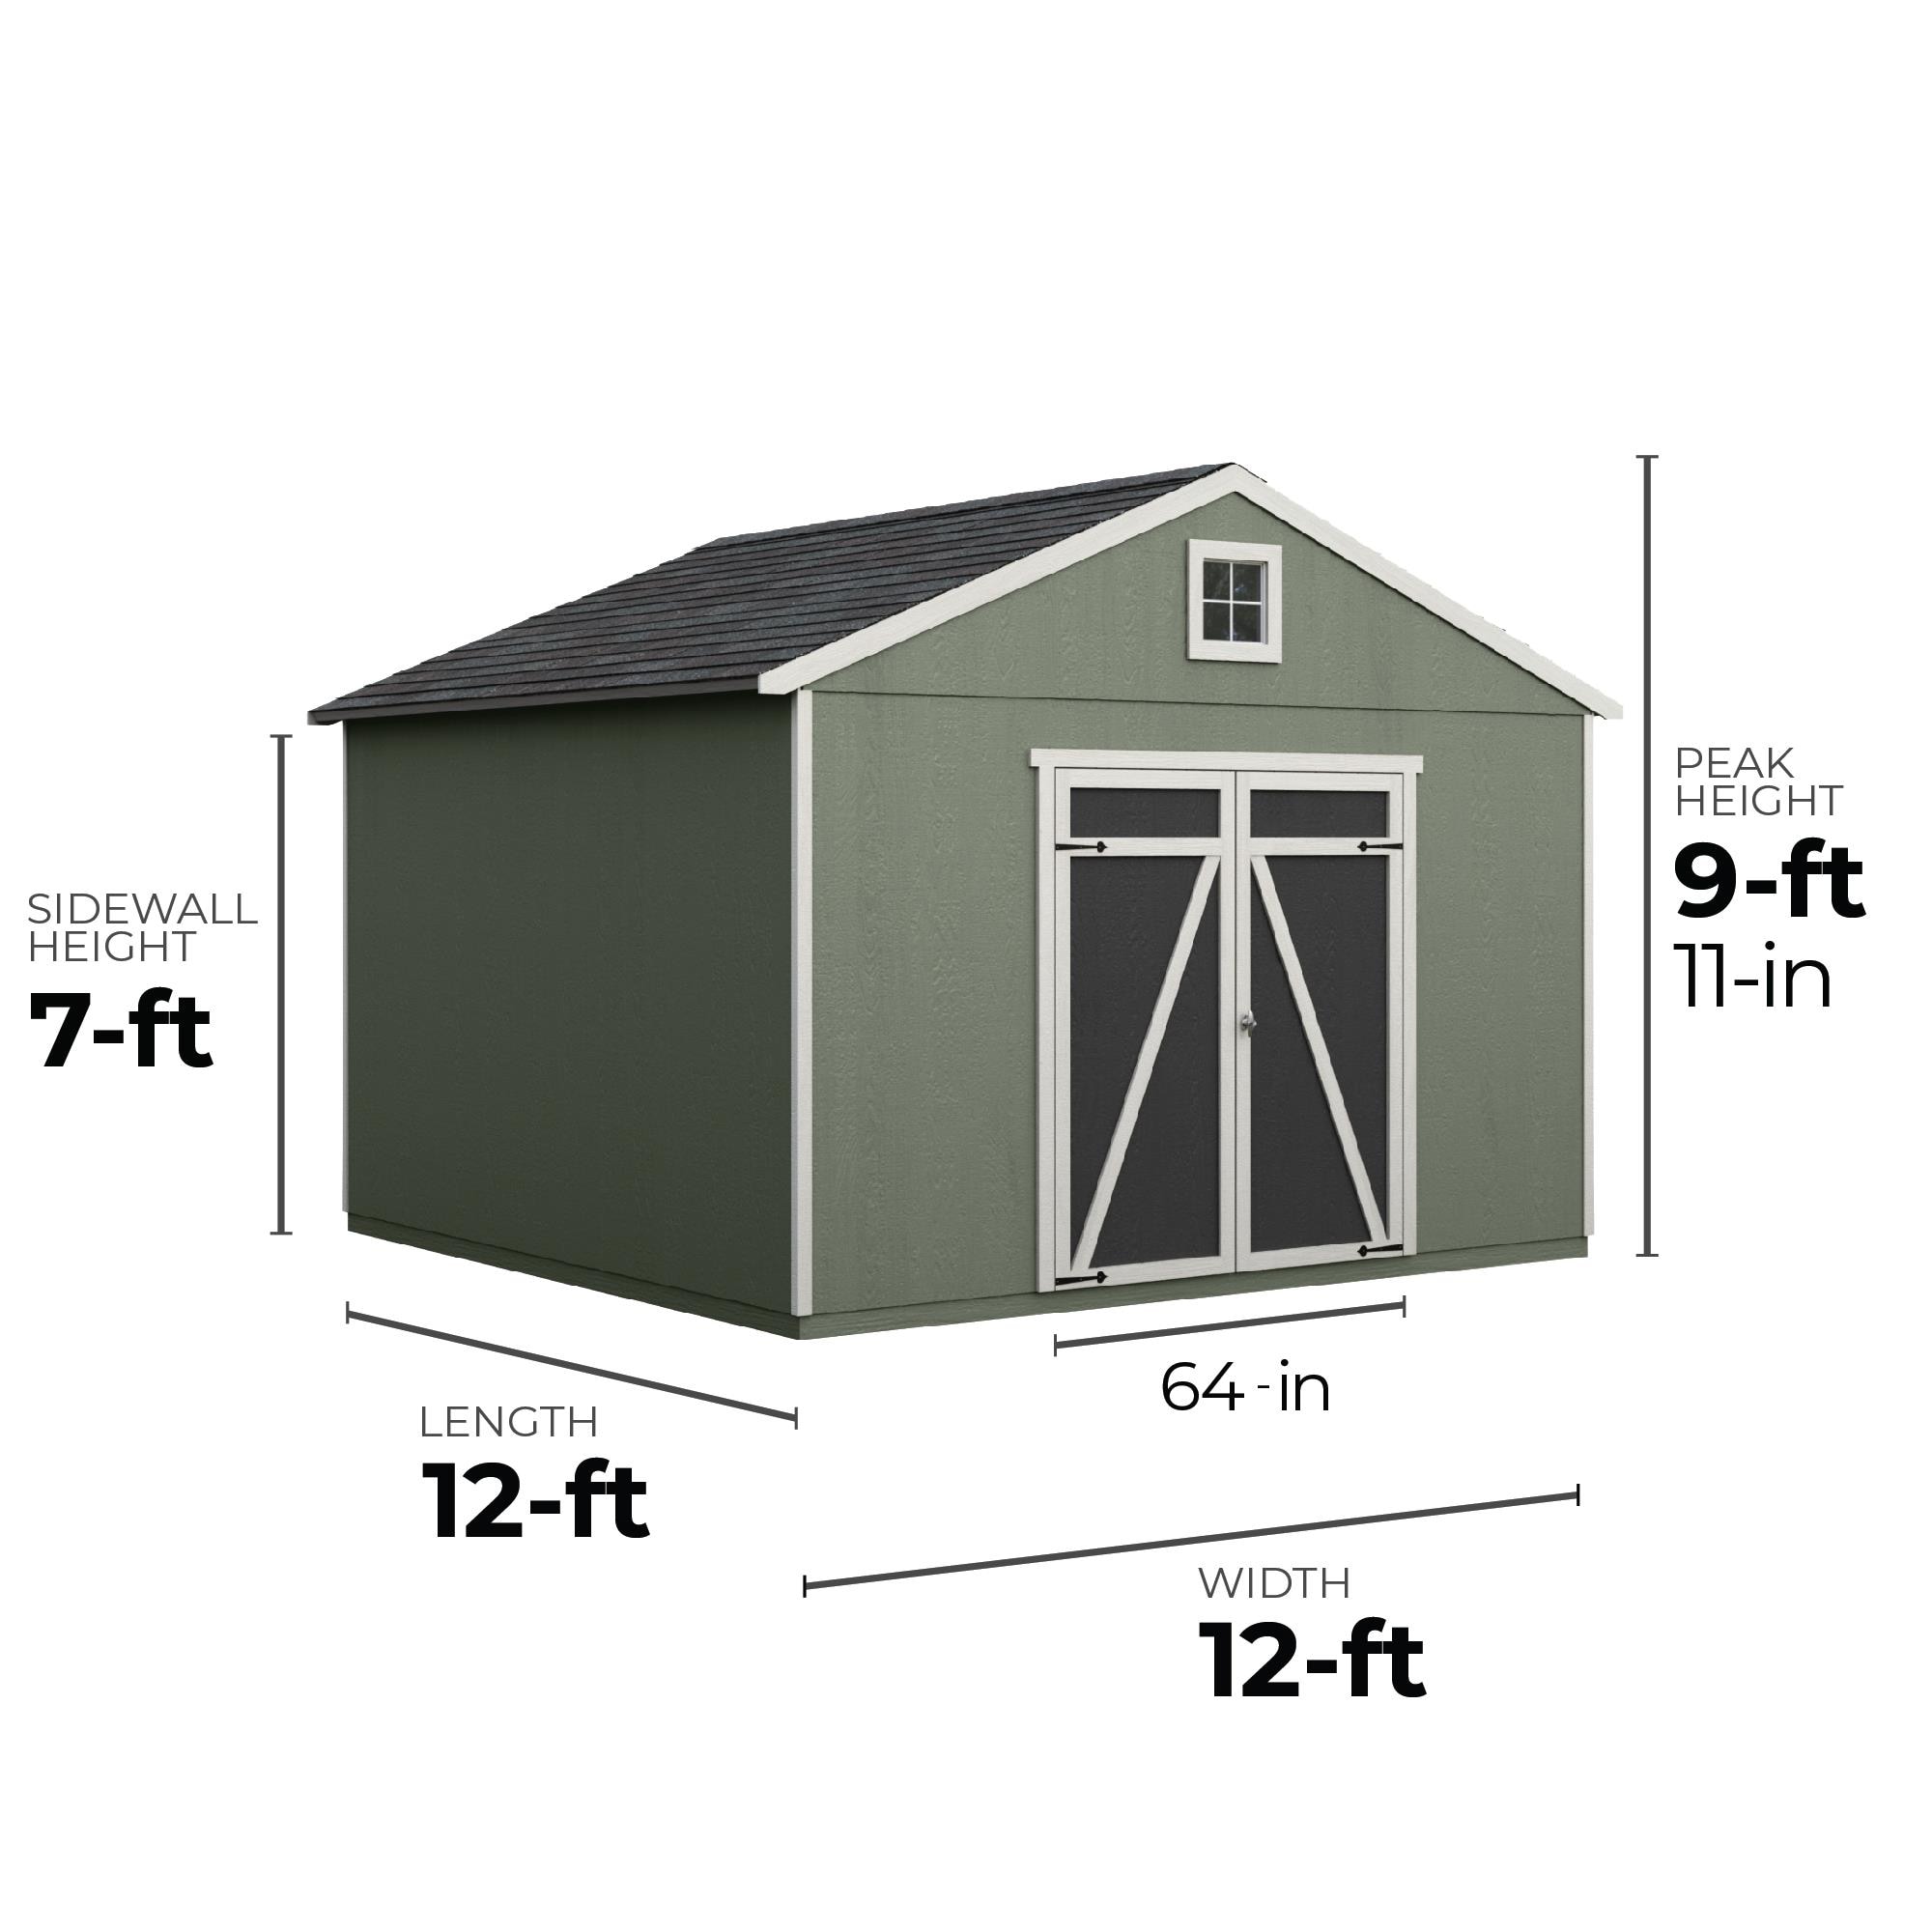 Homestead Essentials 12 in x 12 in x 4 in Insect House 